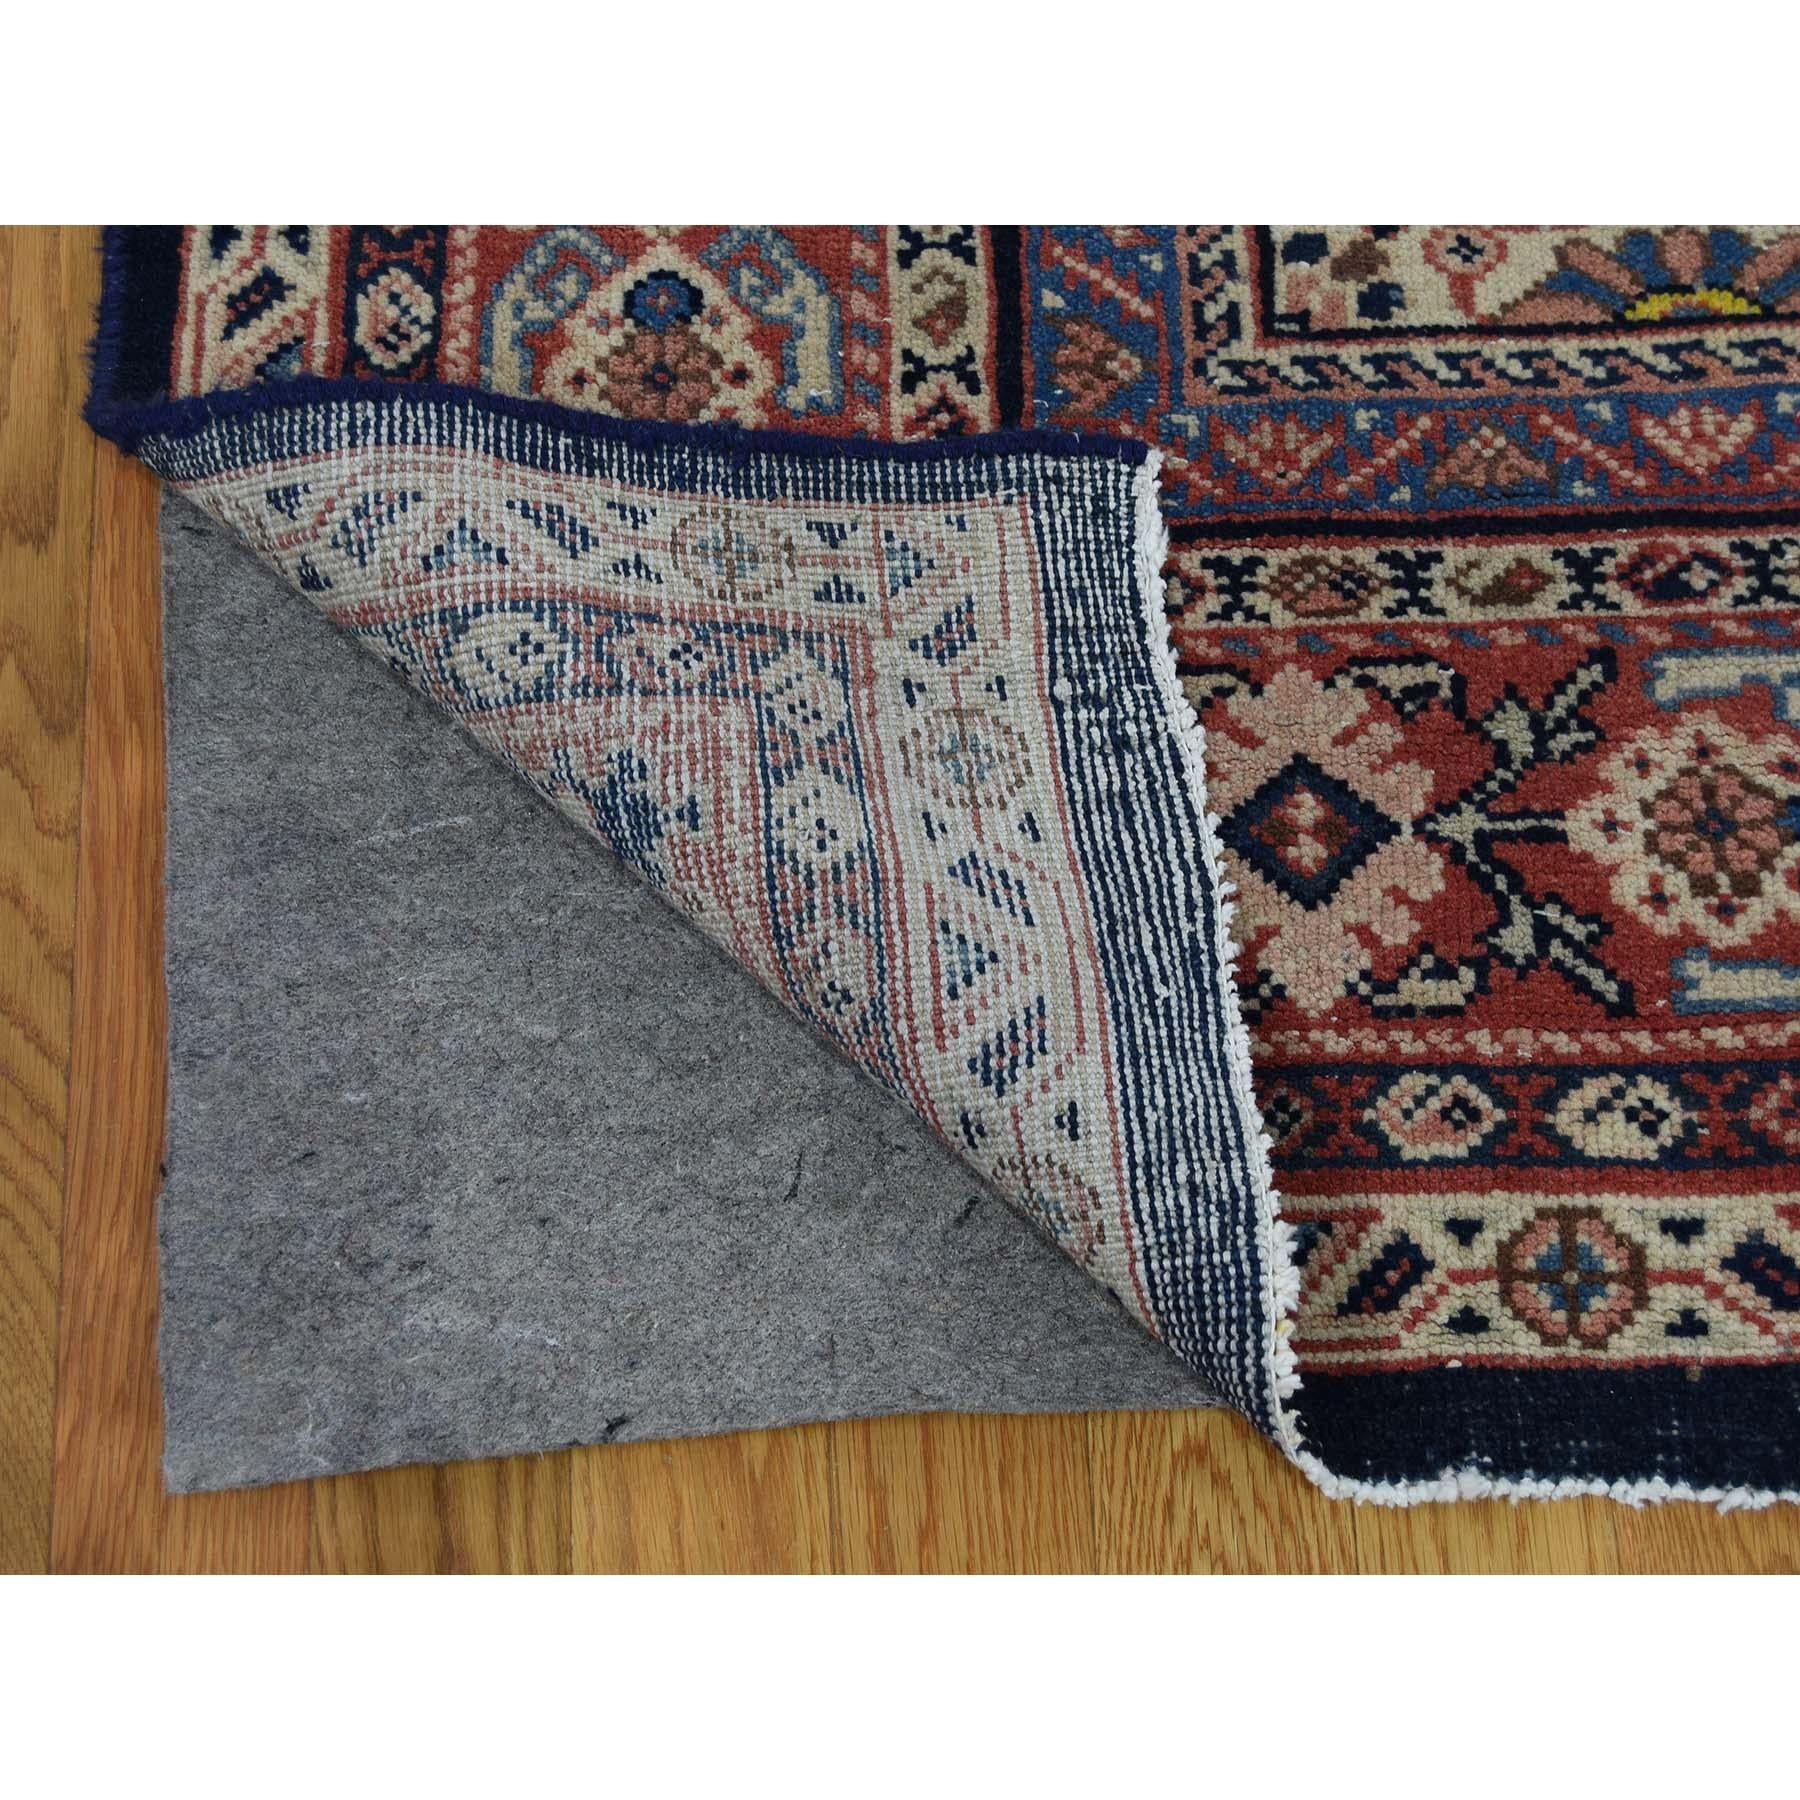 20th Century Antique Persian Mahal Even Wear Navy Blue Hand-Knotted Oriental Rug